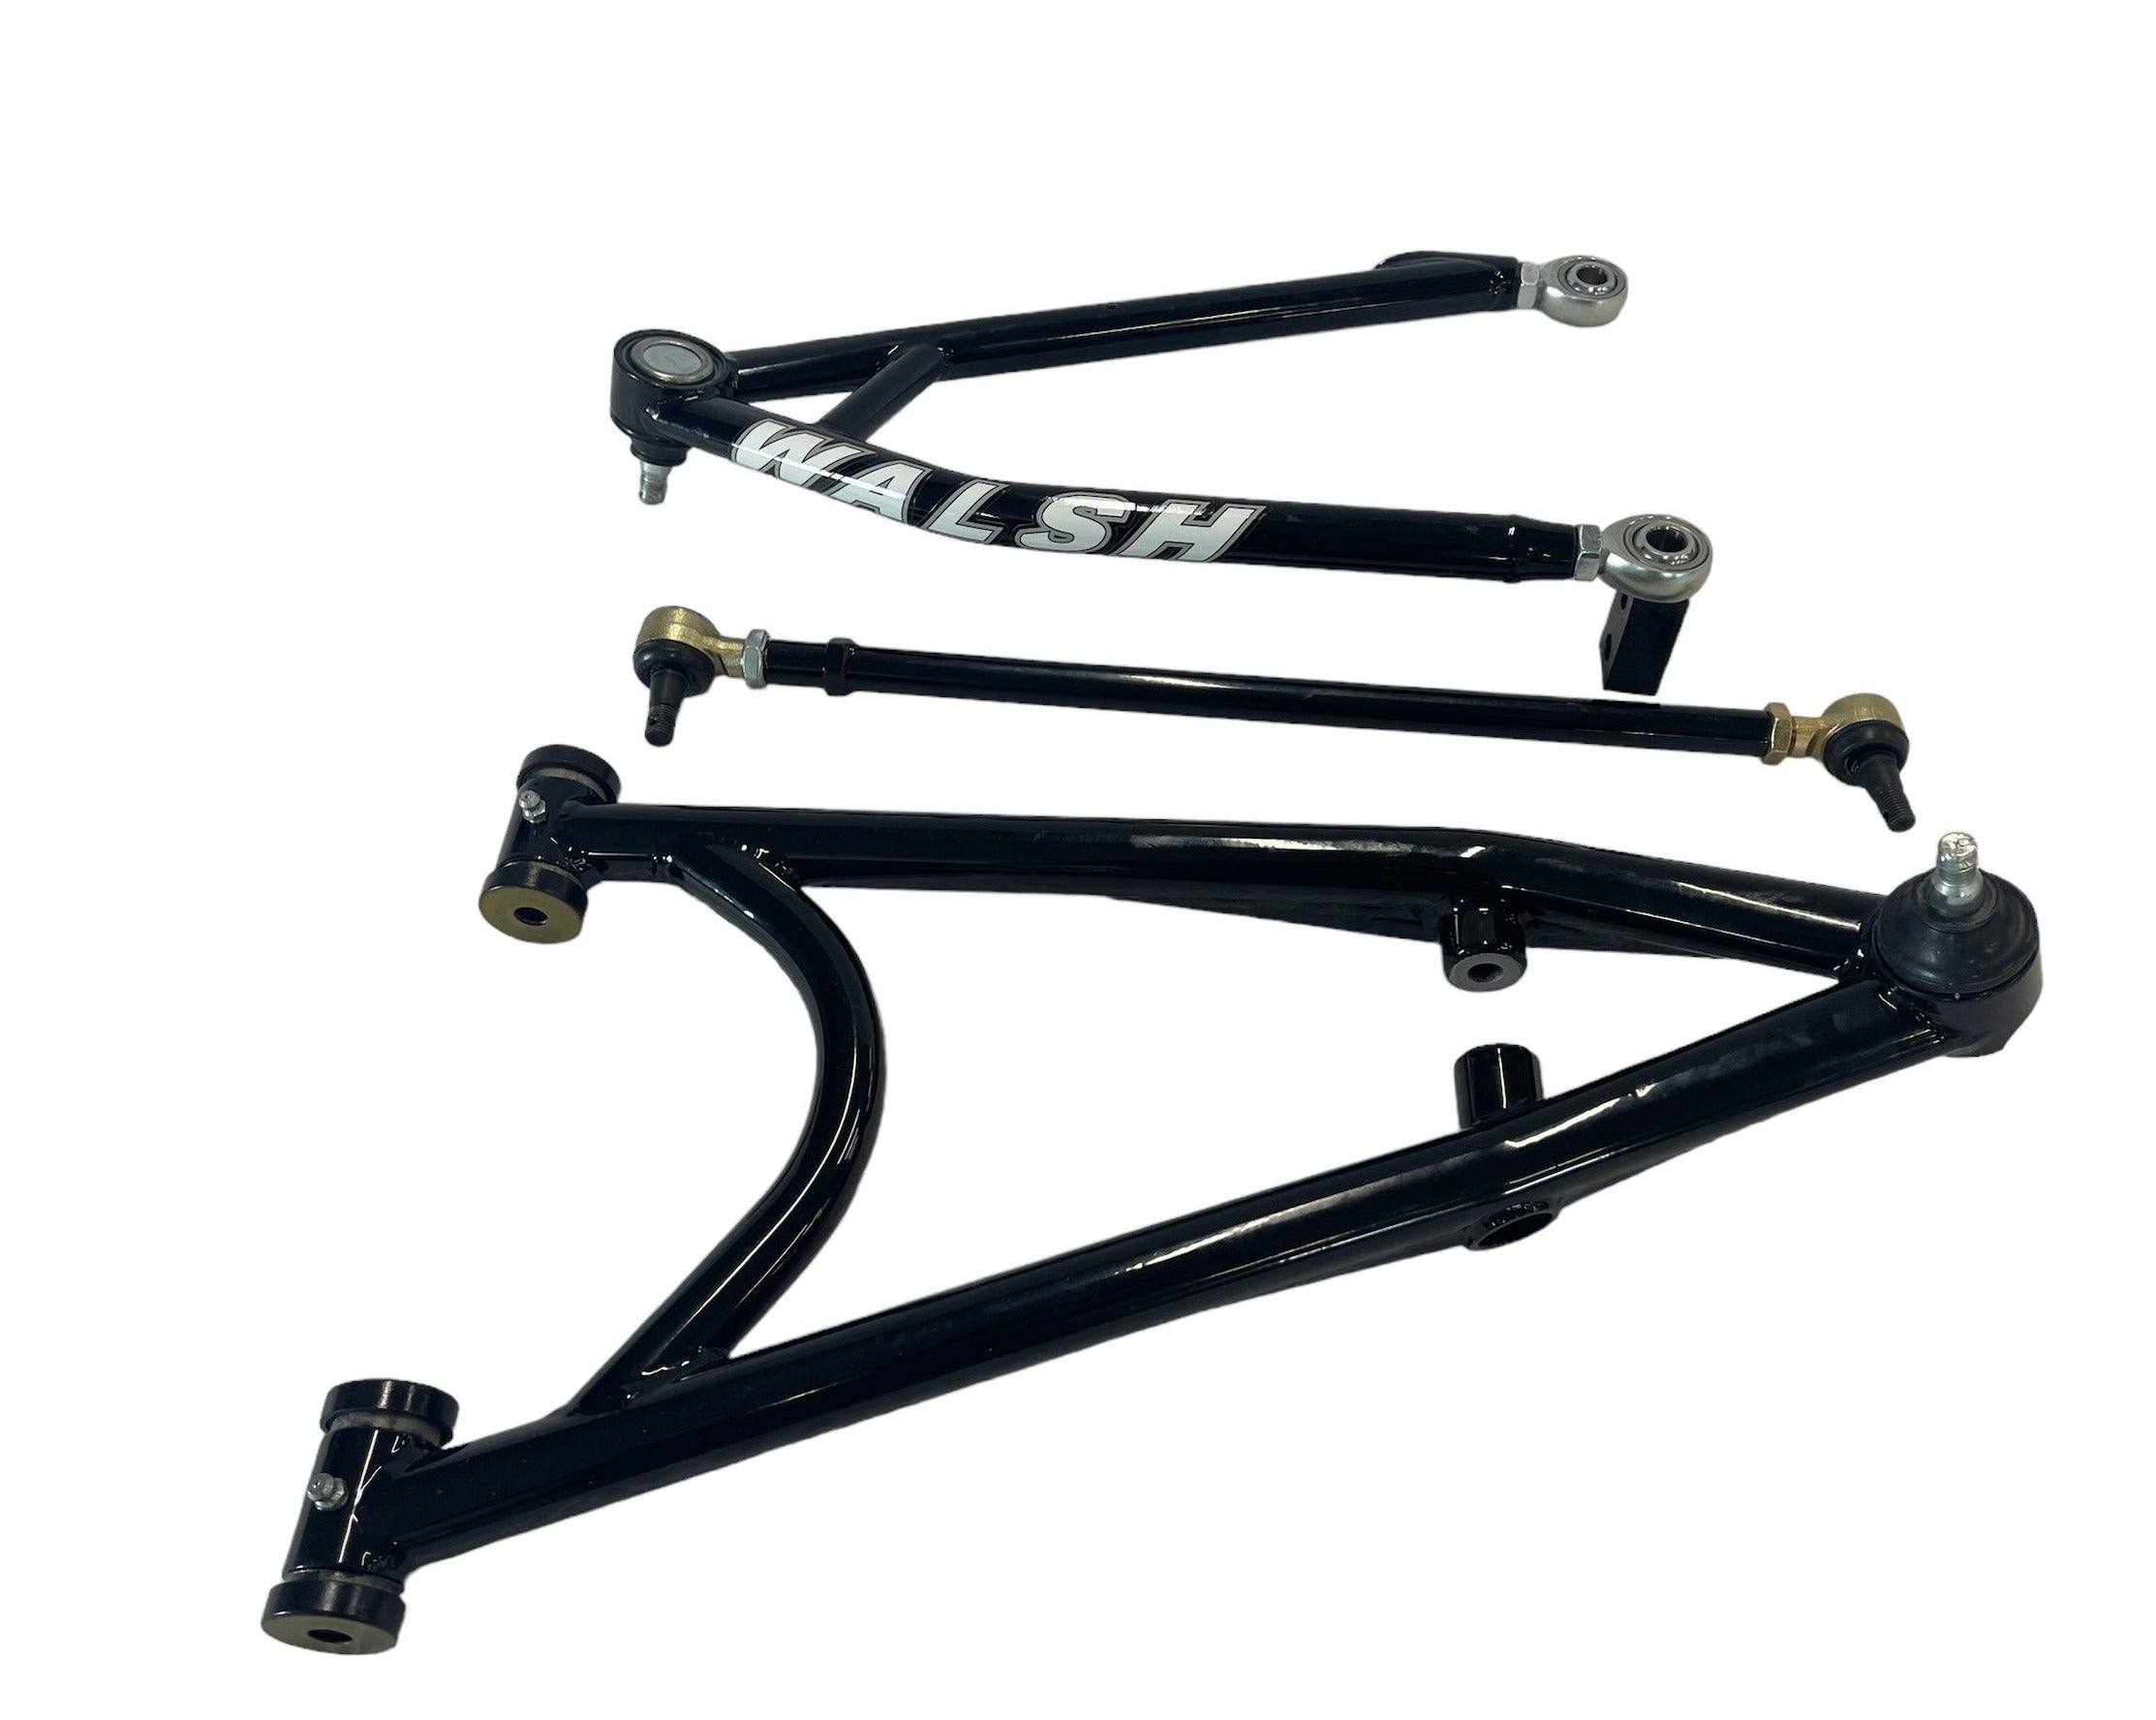 Walsh YFZ450R Front Arms XC NEW Gen 3 for LTR Spindles